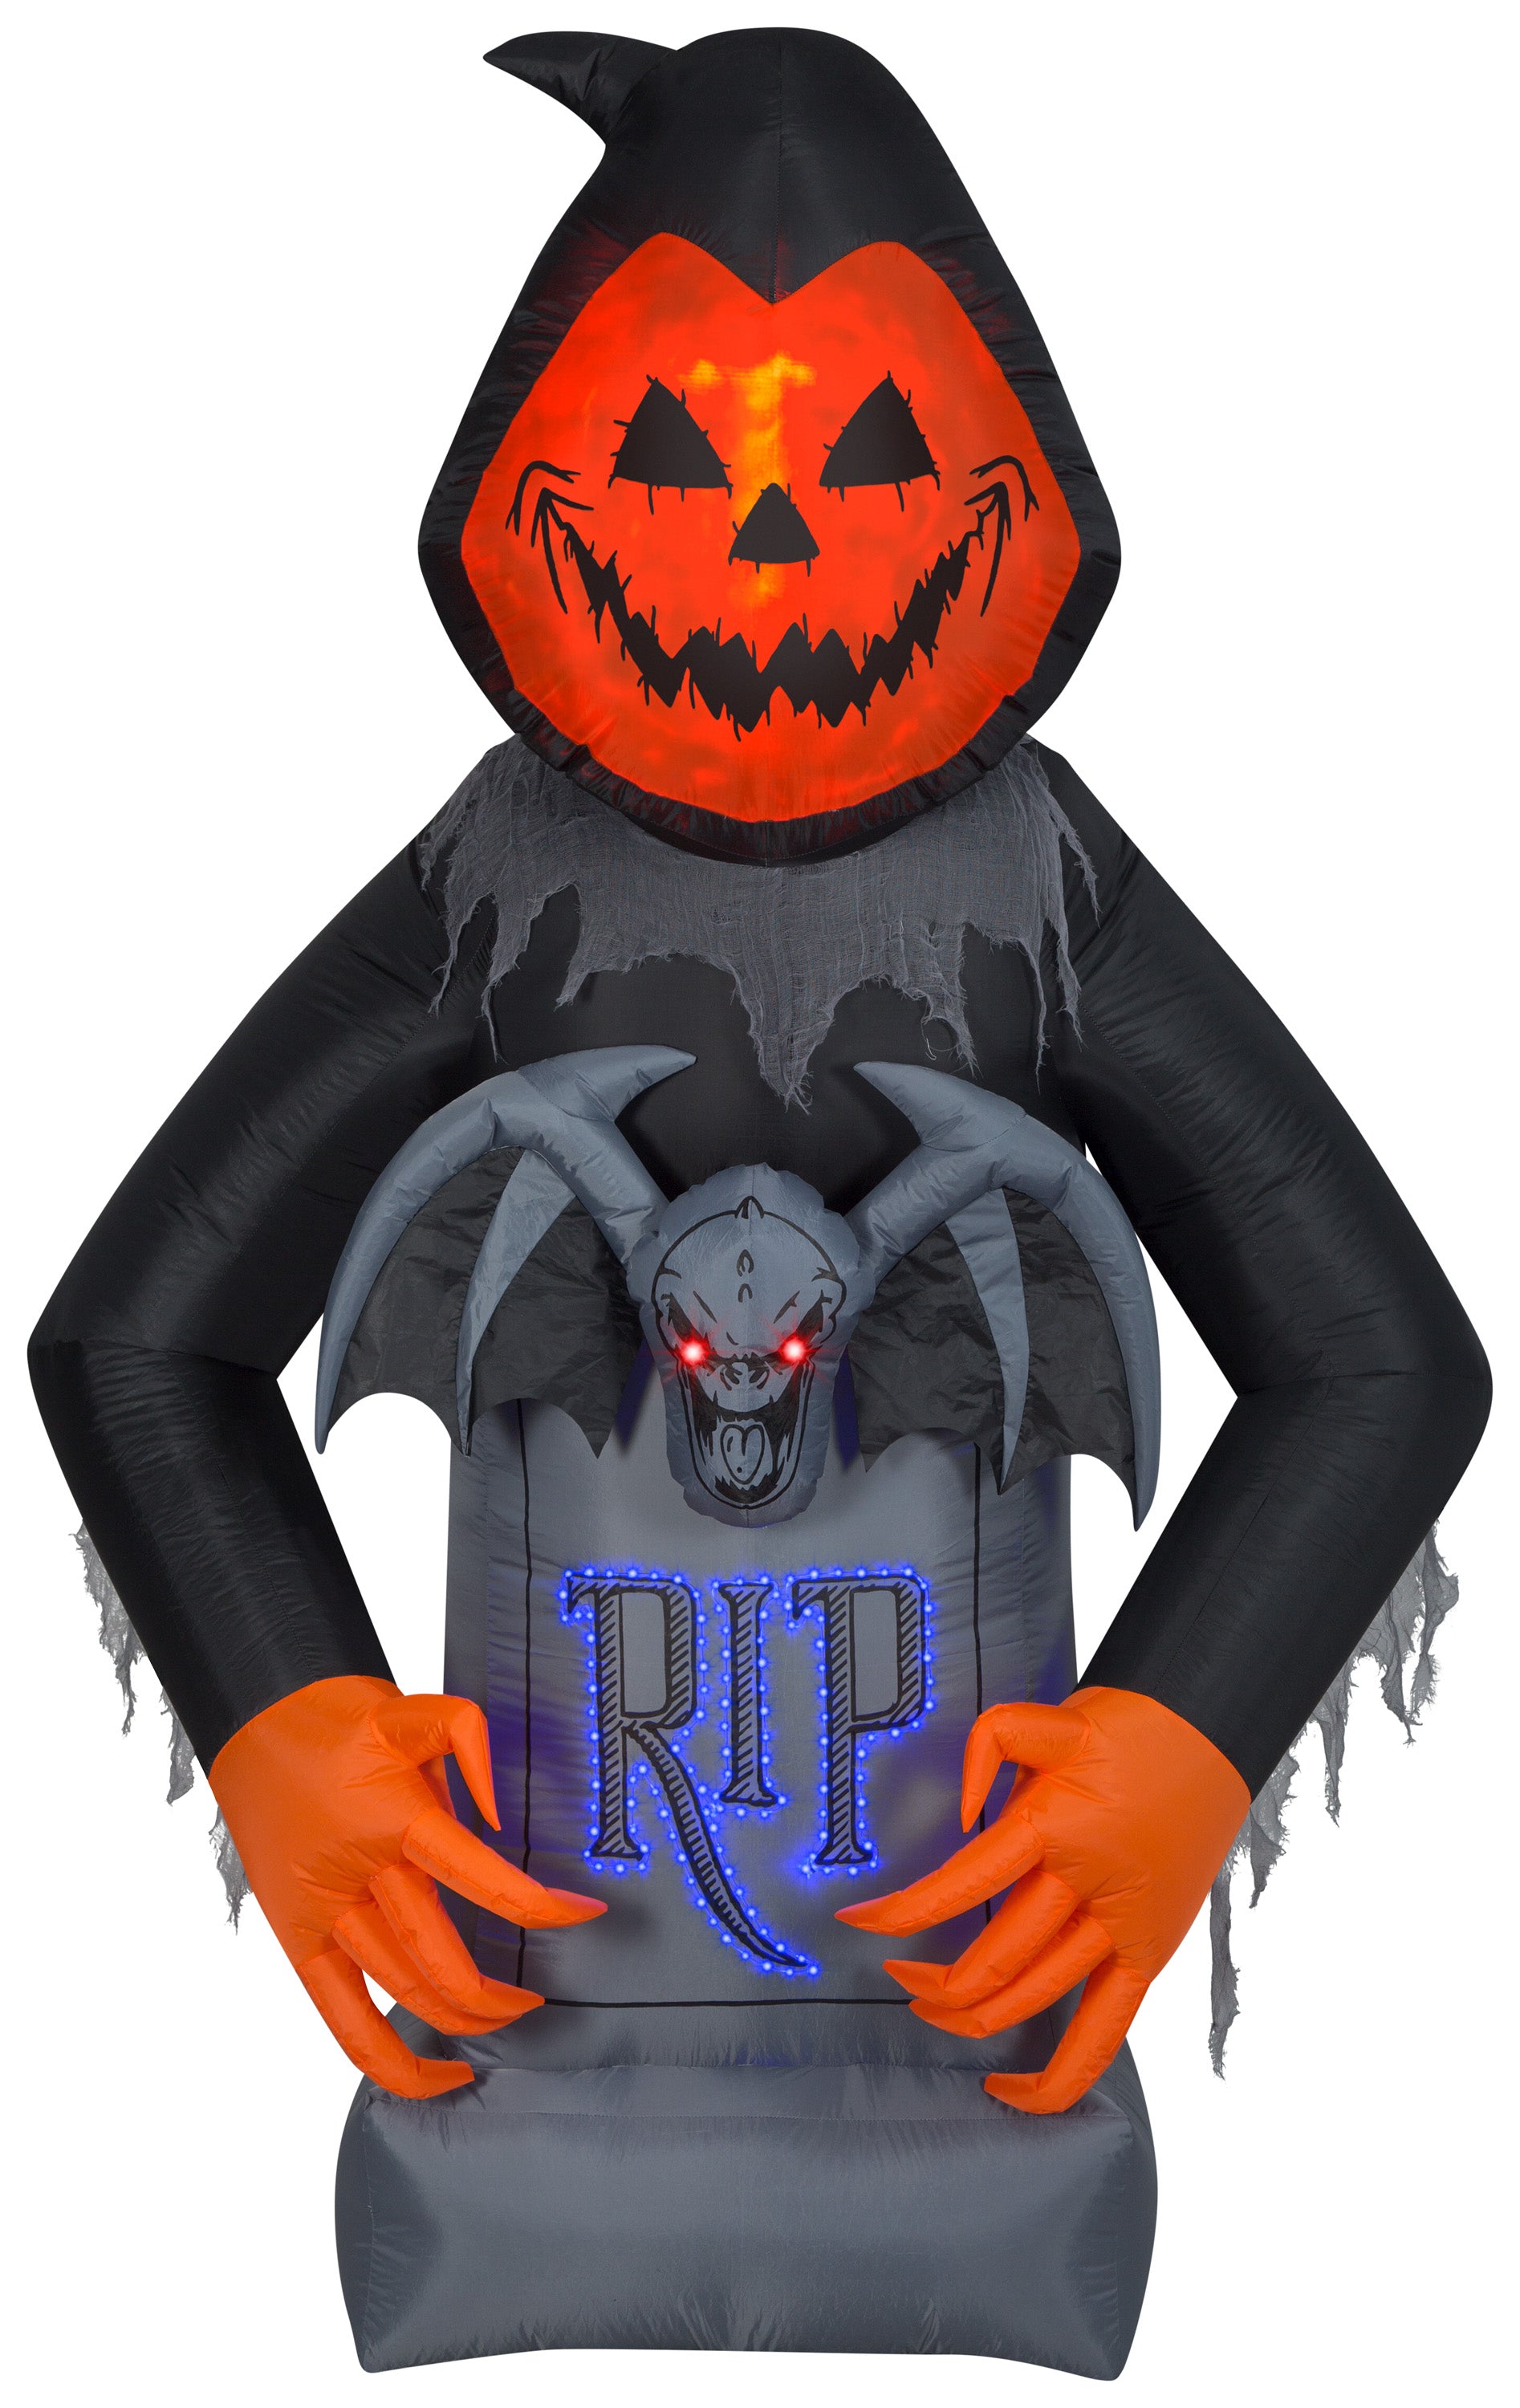 Gemmy LightShow Airblown Inflatable Pumpkin Reaper with Fire & Ice Technology and Micro LED Lights, 8.5 ft Tall